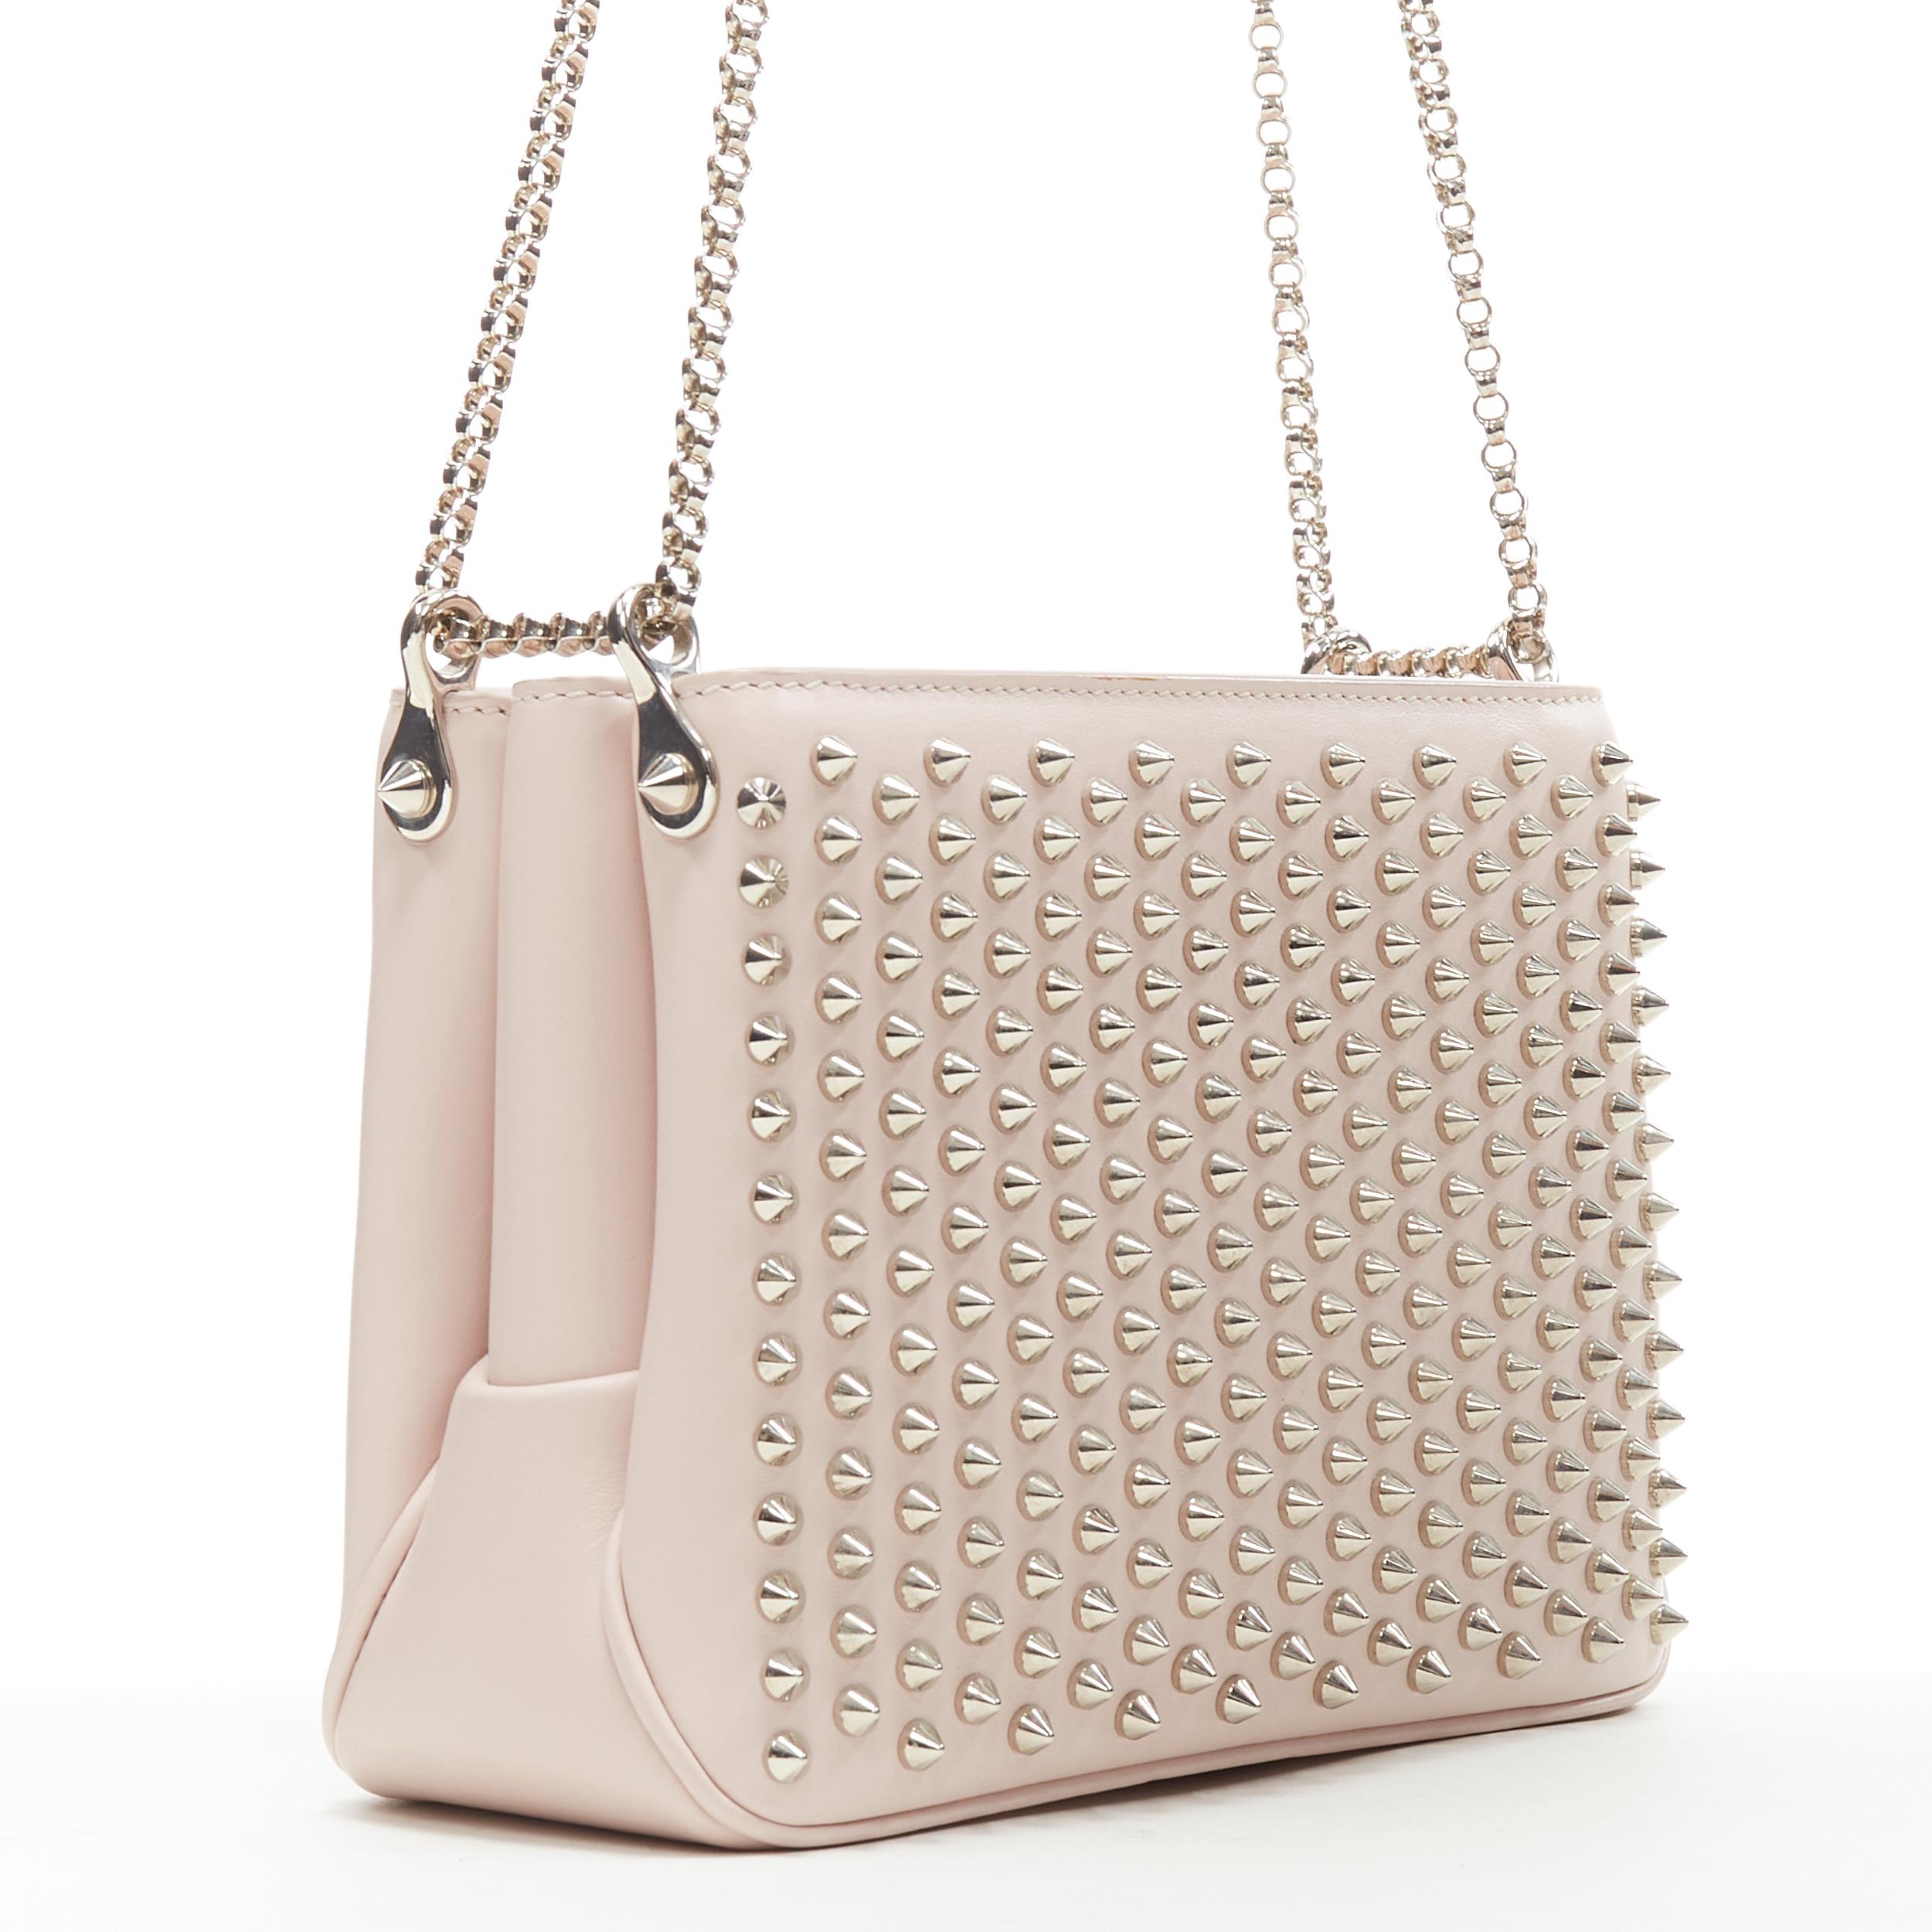 CHRISTIAN LOUBOUTIN Triloubi studded trio gusset shoulder chain crossbody bag 
Reference: TGAS/B00661 
Brand: Christian Louboutin 
Designer: Christian Louboutin 
Model: Triloubi studded shoulder bag 
Material: Leather 
Color: Pink 
Pattern: Solid